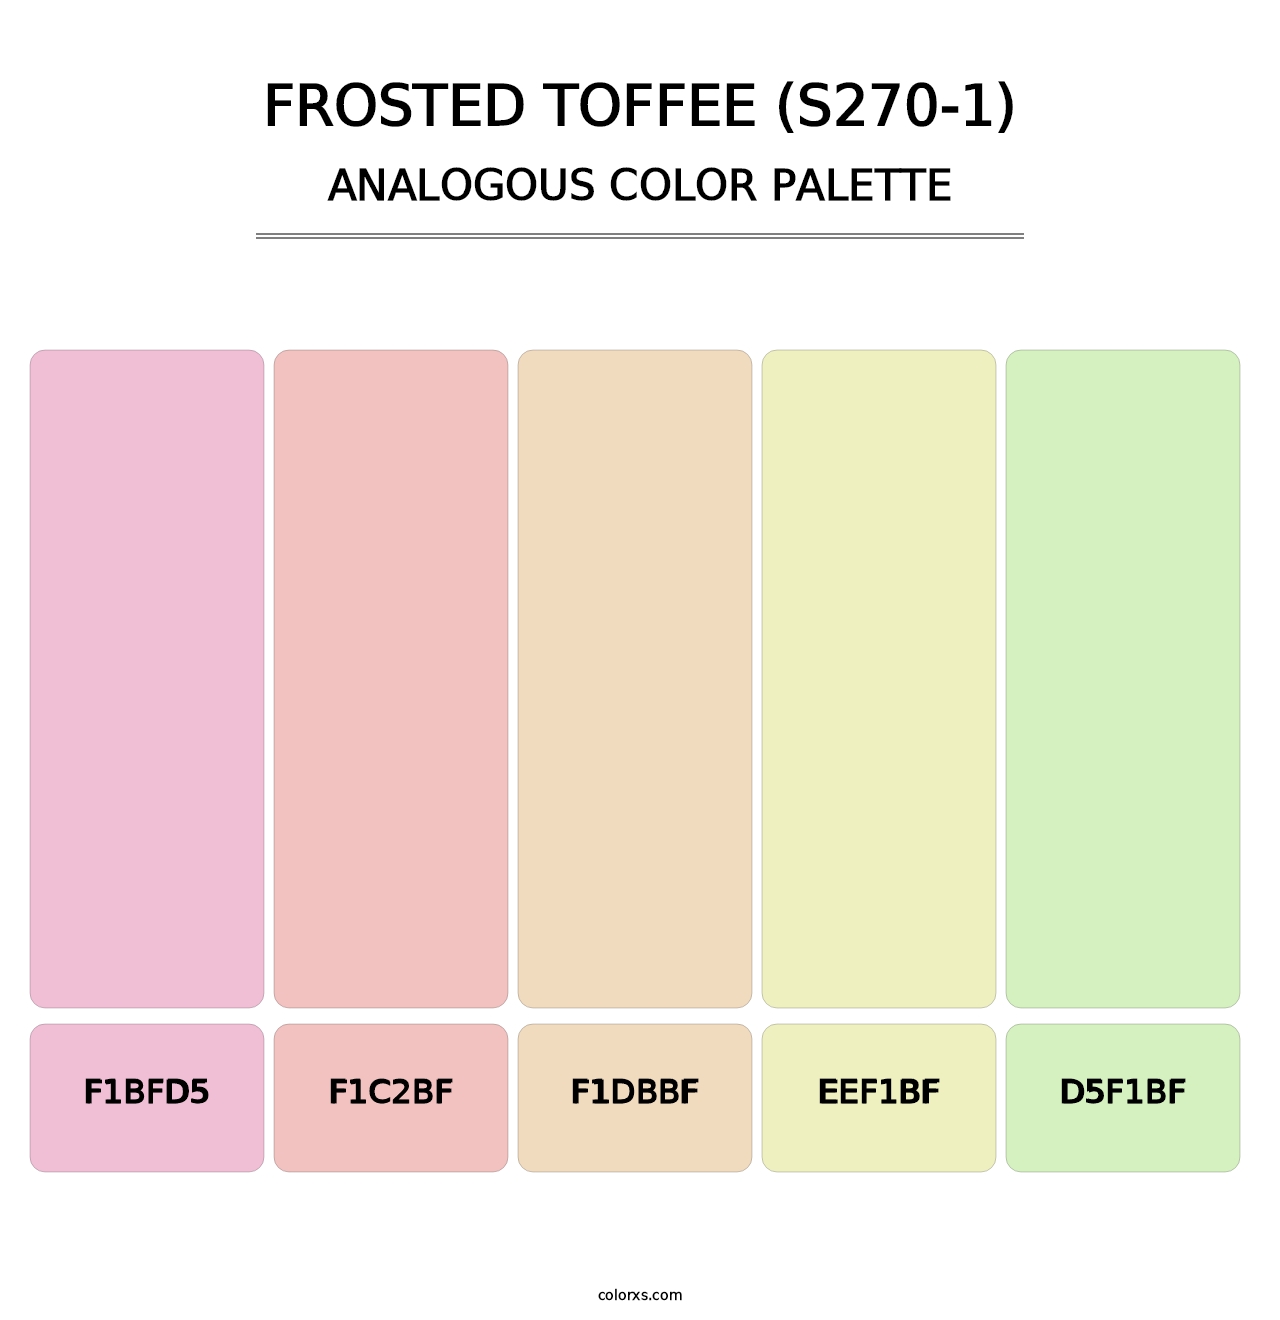 Frosted Toffee (S270-1) - Analogous Color Palette